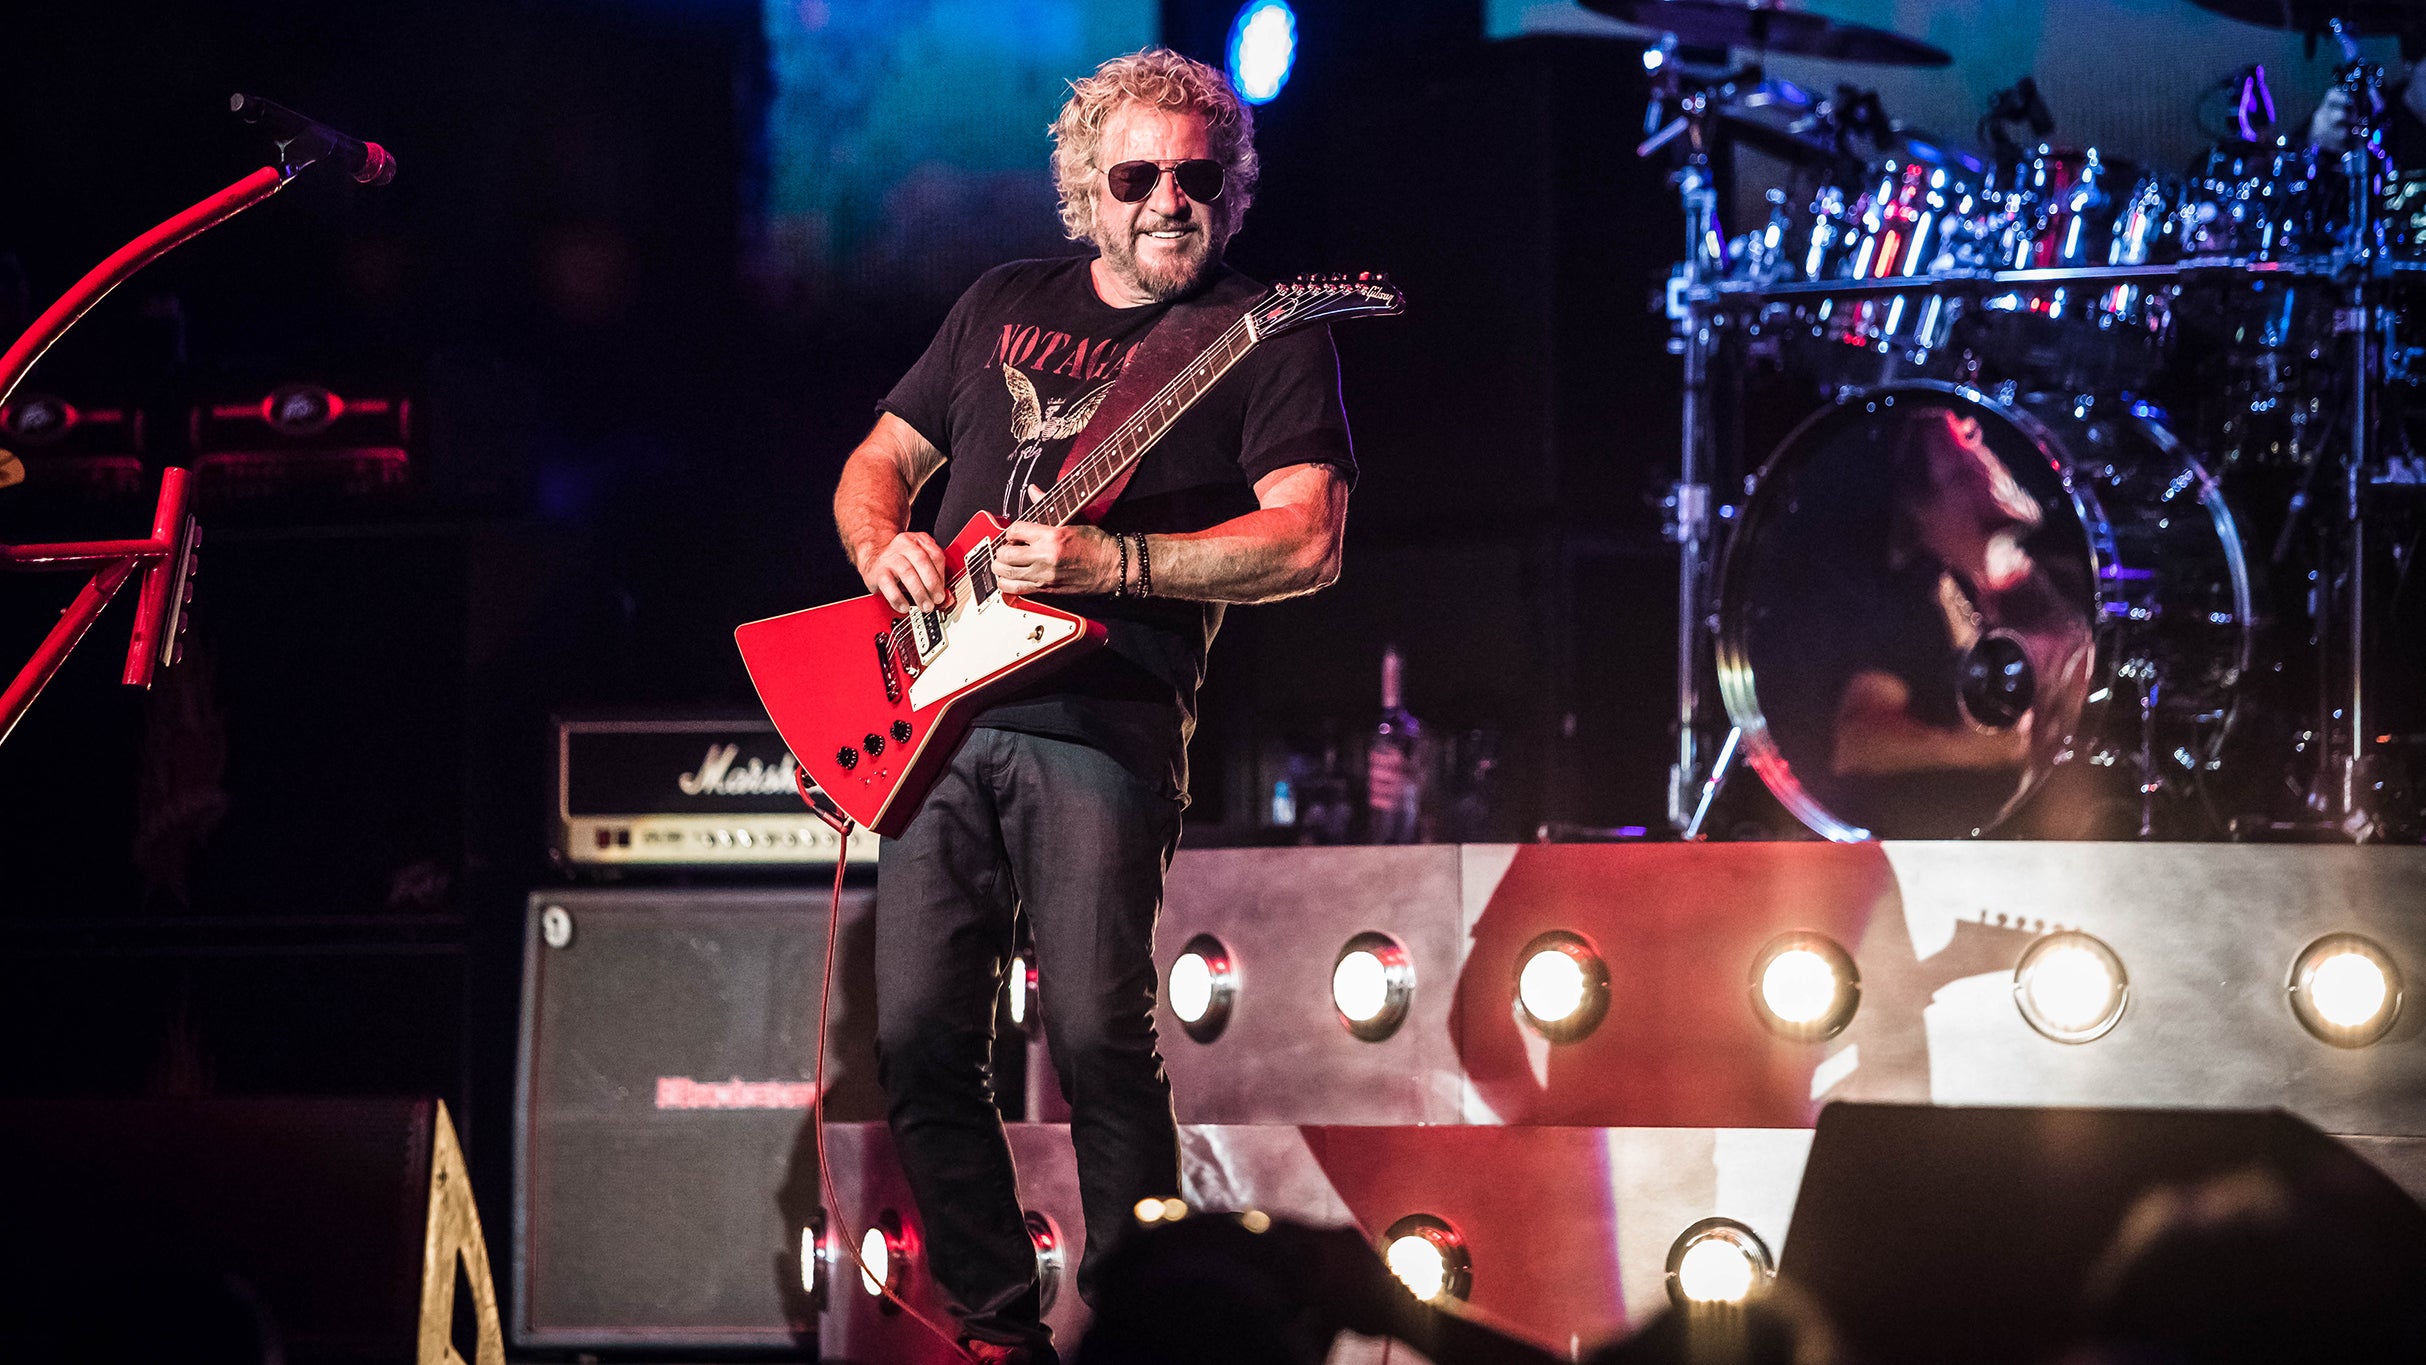 SAMMY HAGAR The Best of All Worlds Tour with special guest Loverboy in Cincinnati promo photo for VIP Package Onsale presale offer code